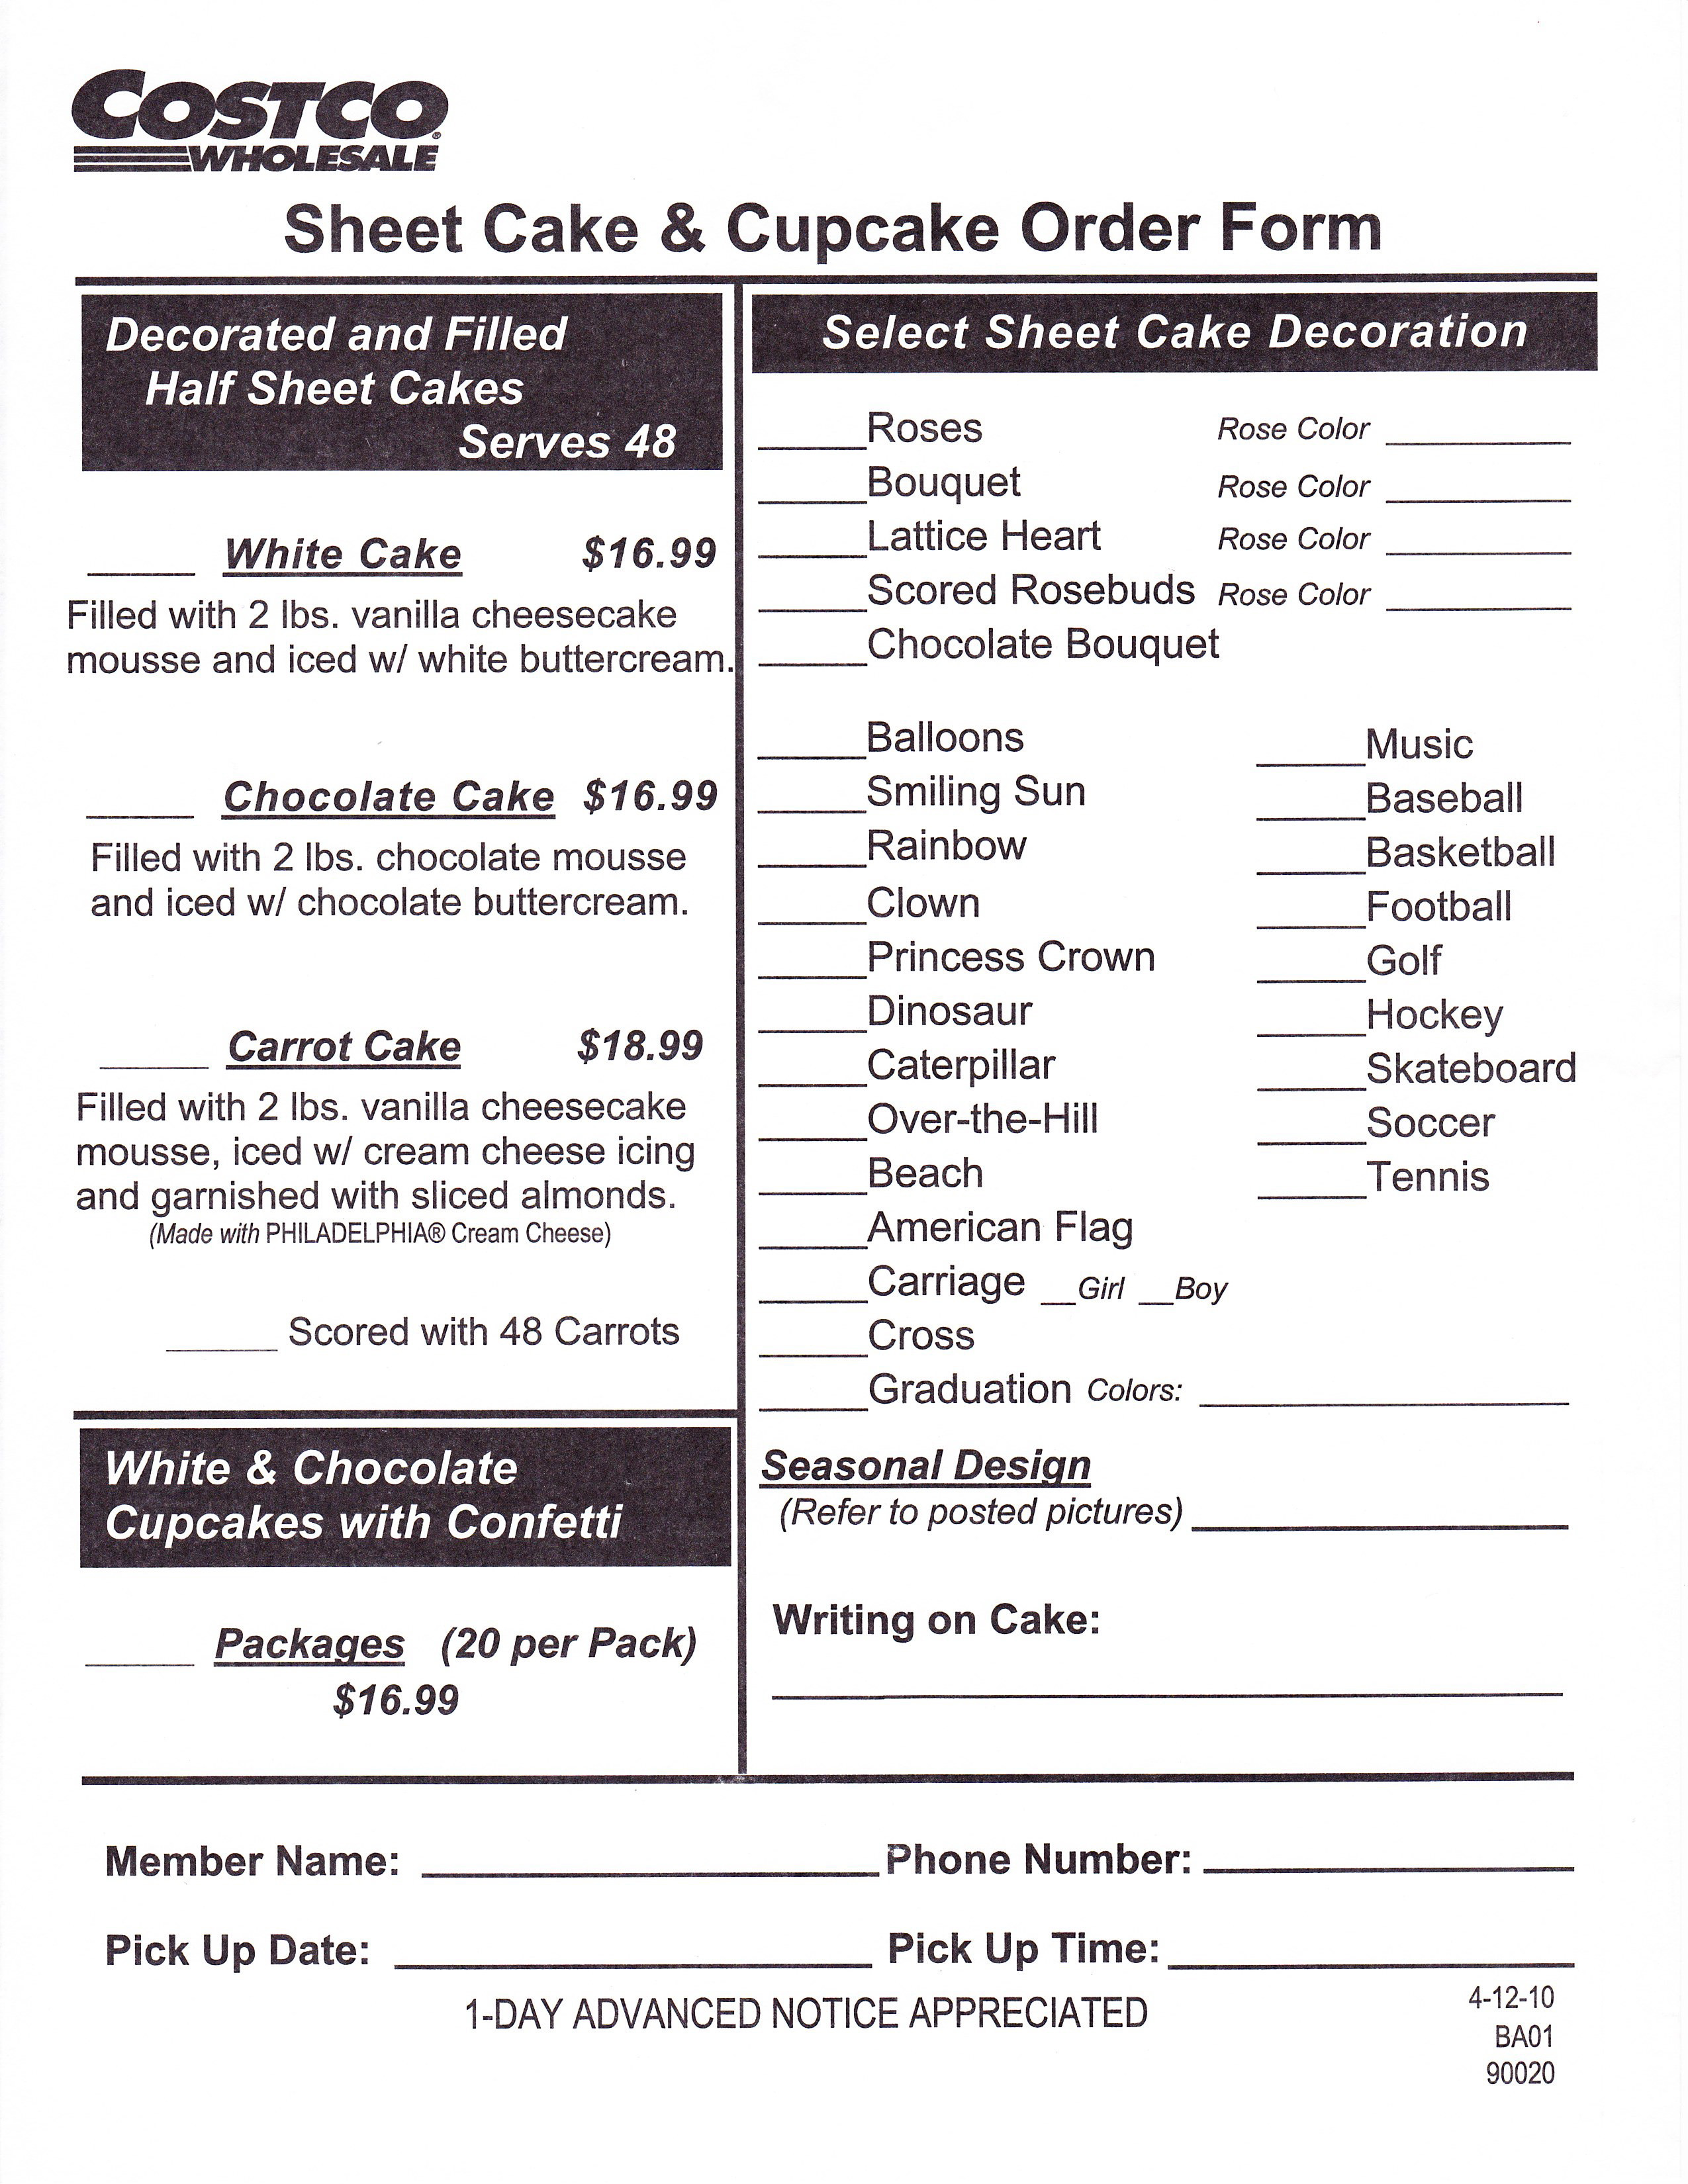 Costco Sheet Cake Prices
 cake pricing on Pinterest